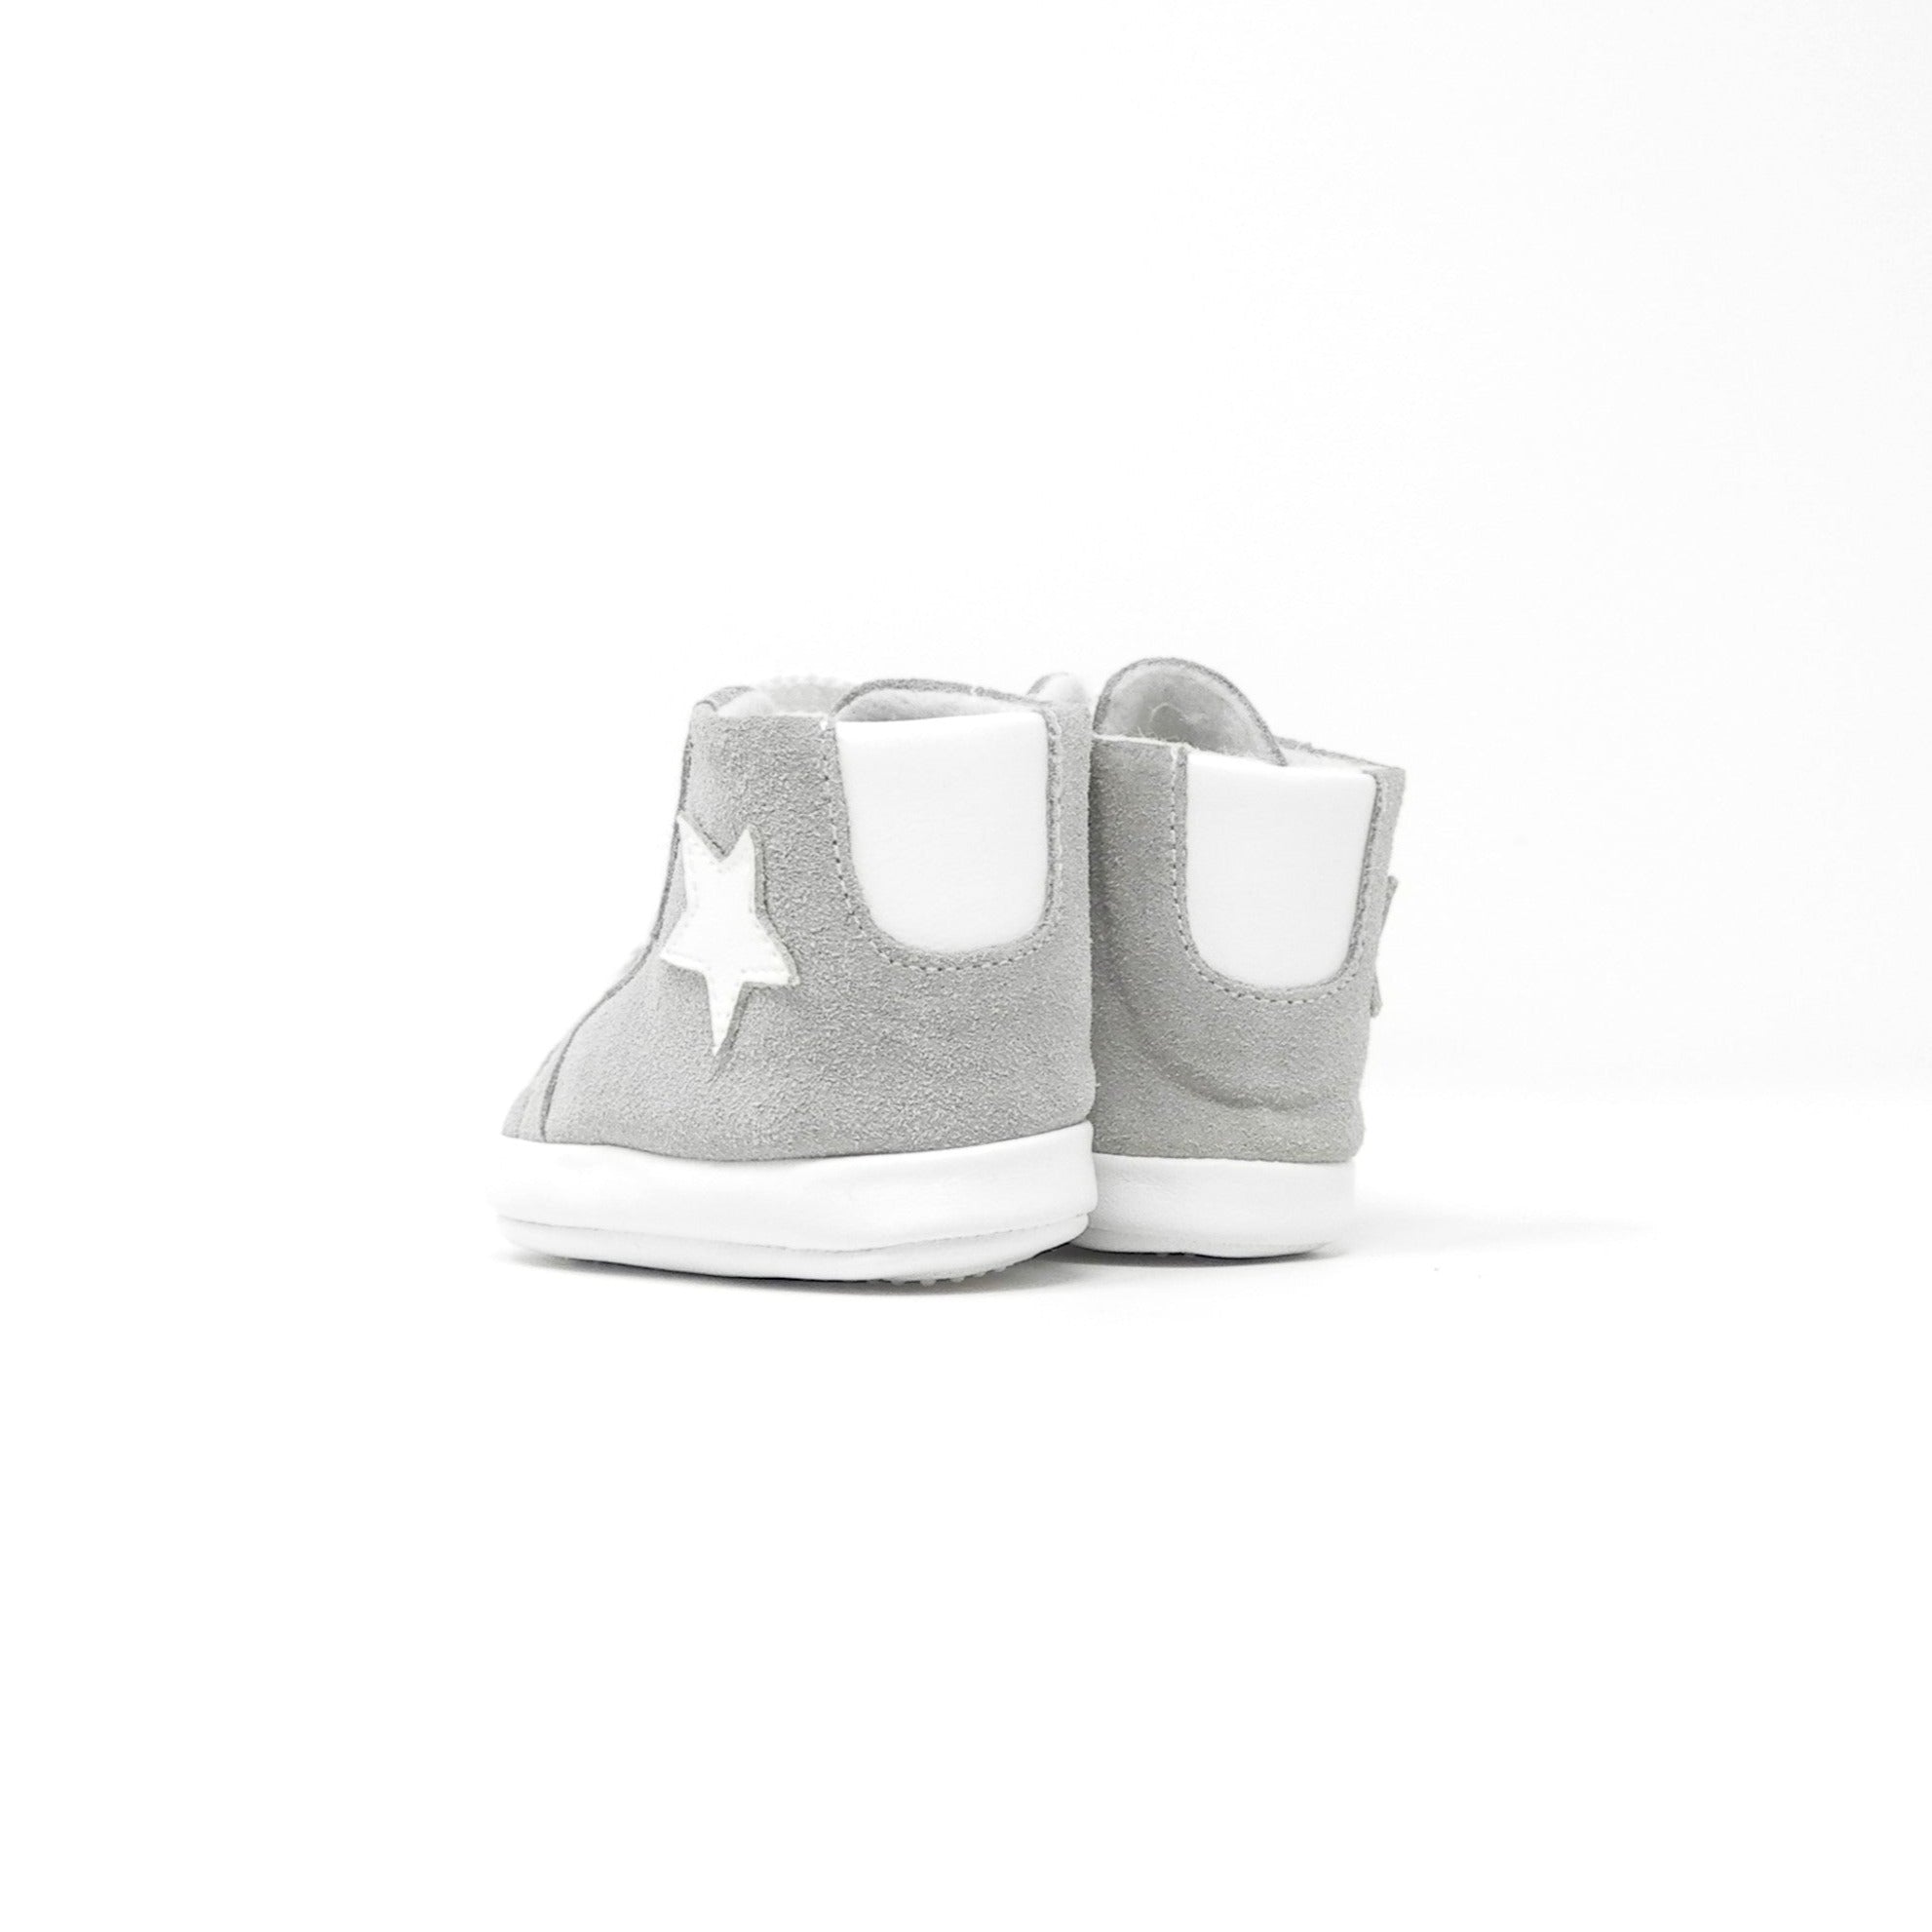 BABY CHICK - Sneakers Culla alta in pelle